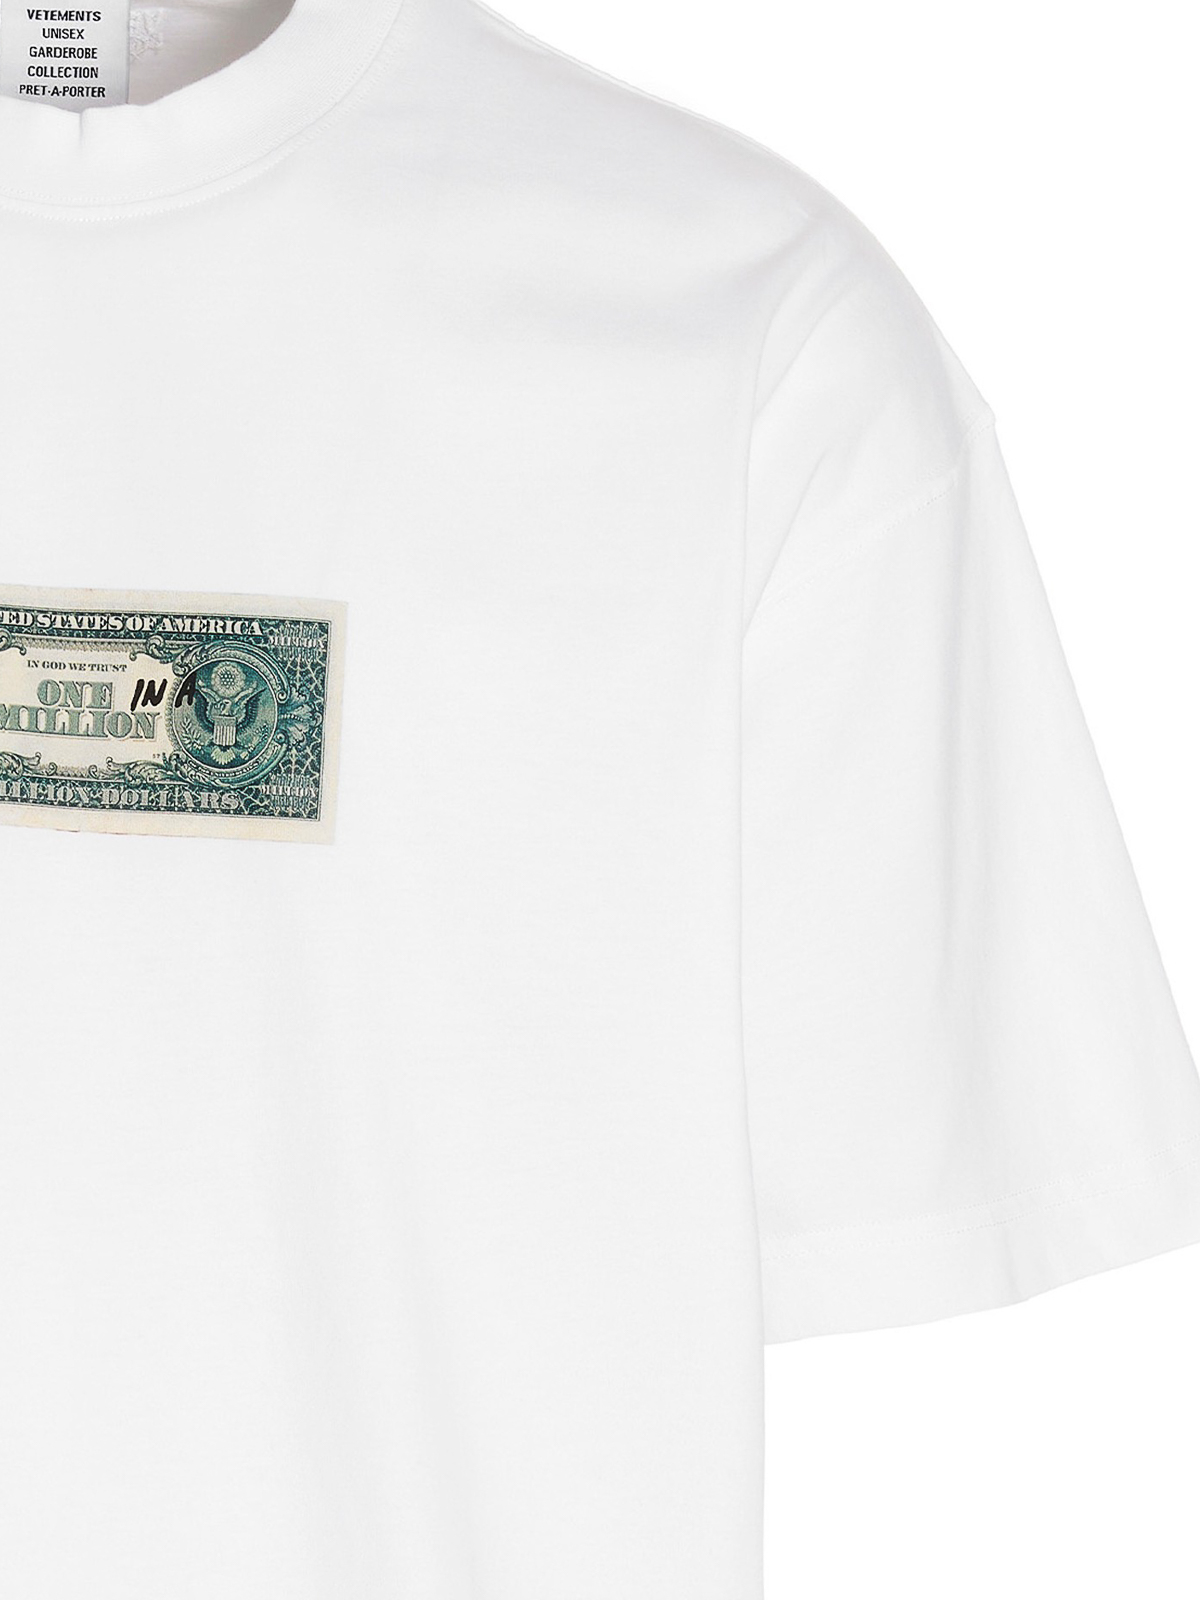 T-shirts Vetements - T-shirt One In A Million - UA53TR140WWHITE